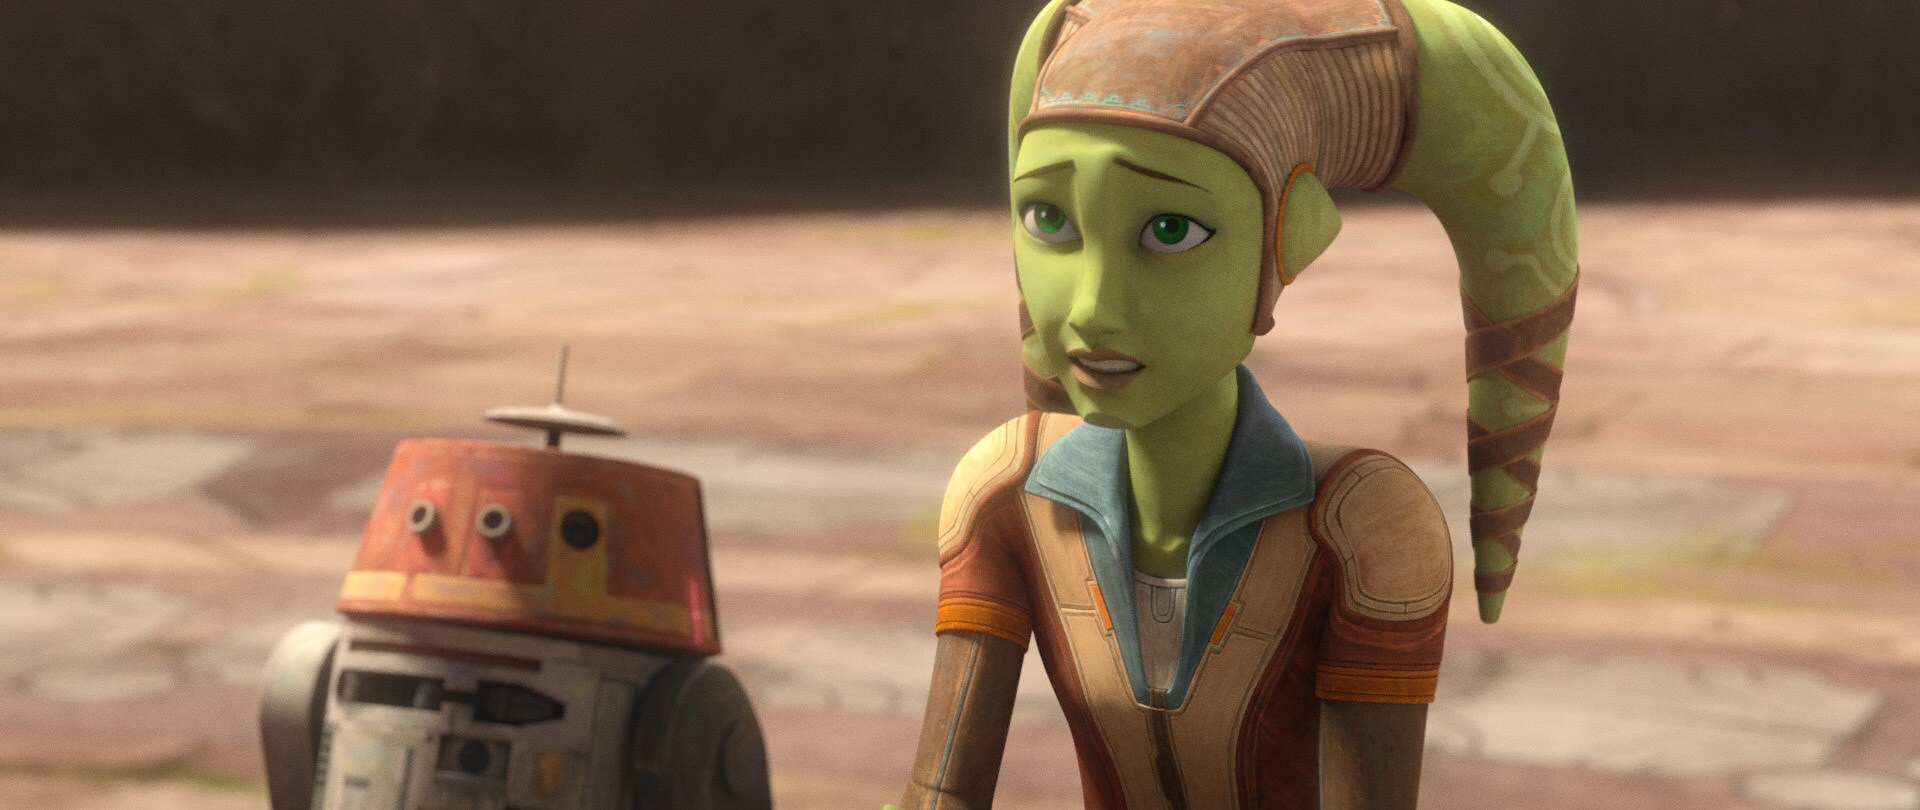 As a child on Ryloth, the daughter of Cham and Eleni Syndulla grew up during the Clone Wars conflict and dreamed of traveling the galaxy on her own terms.